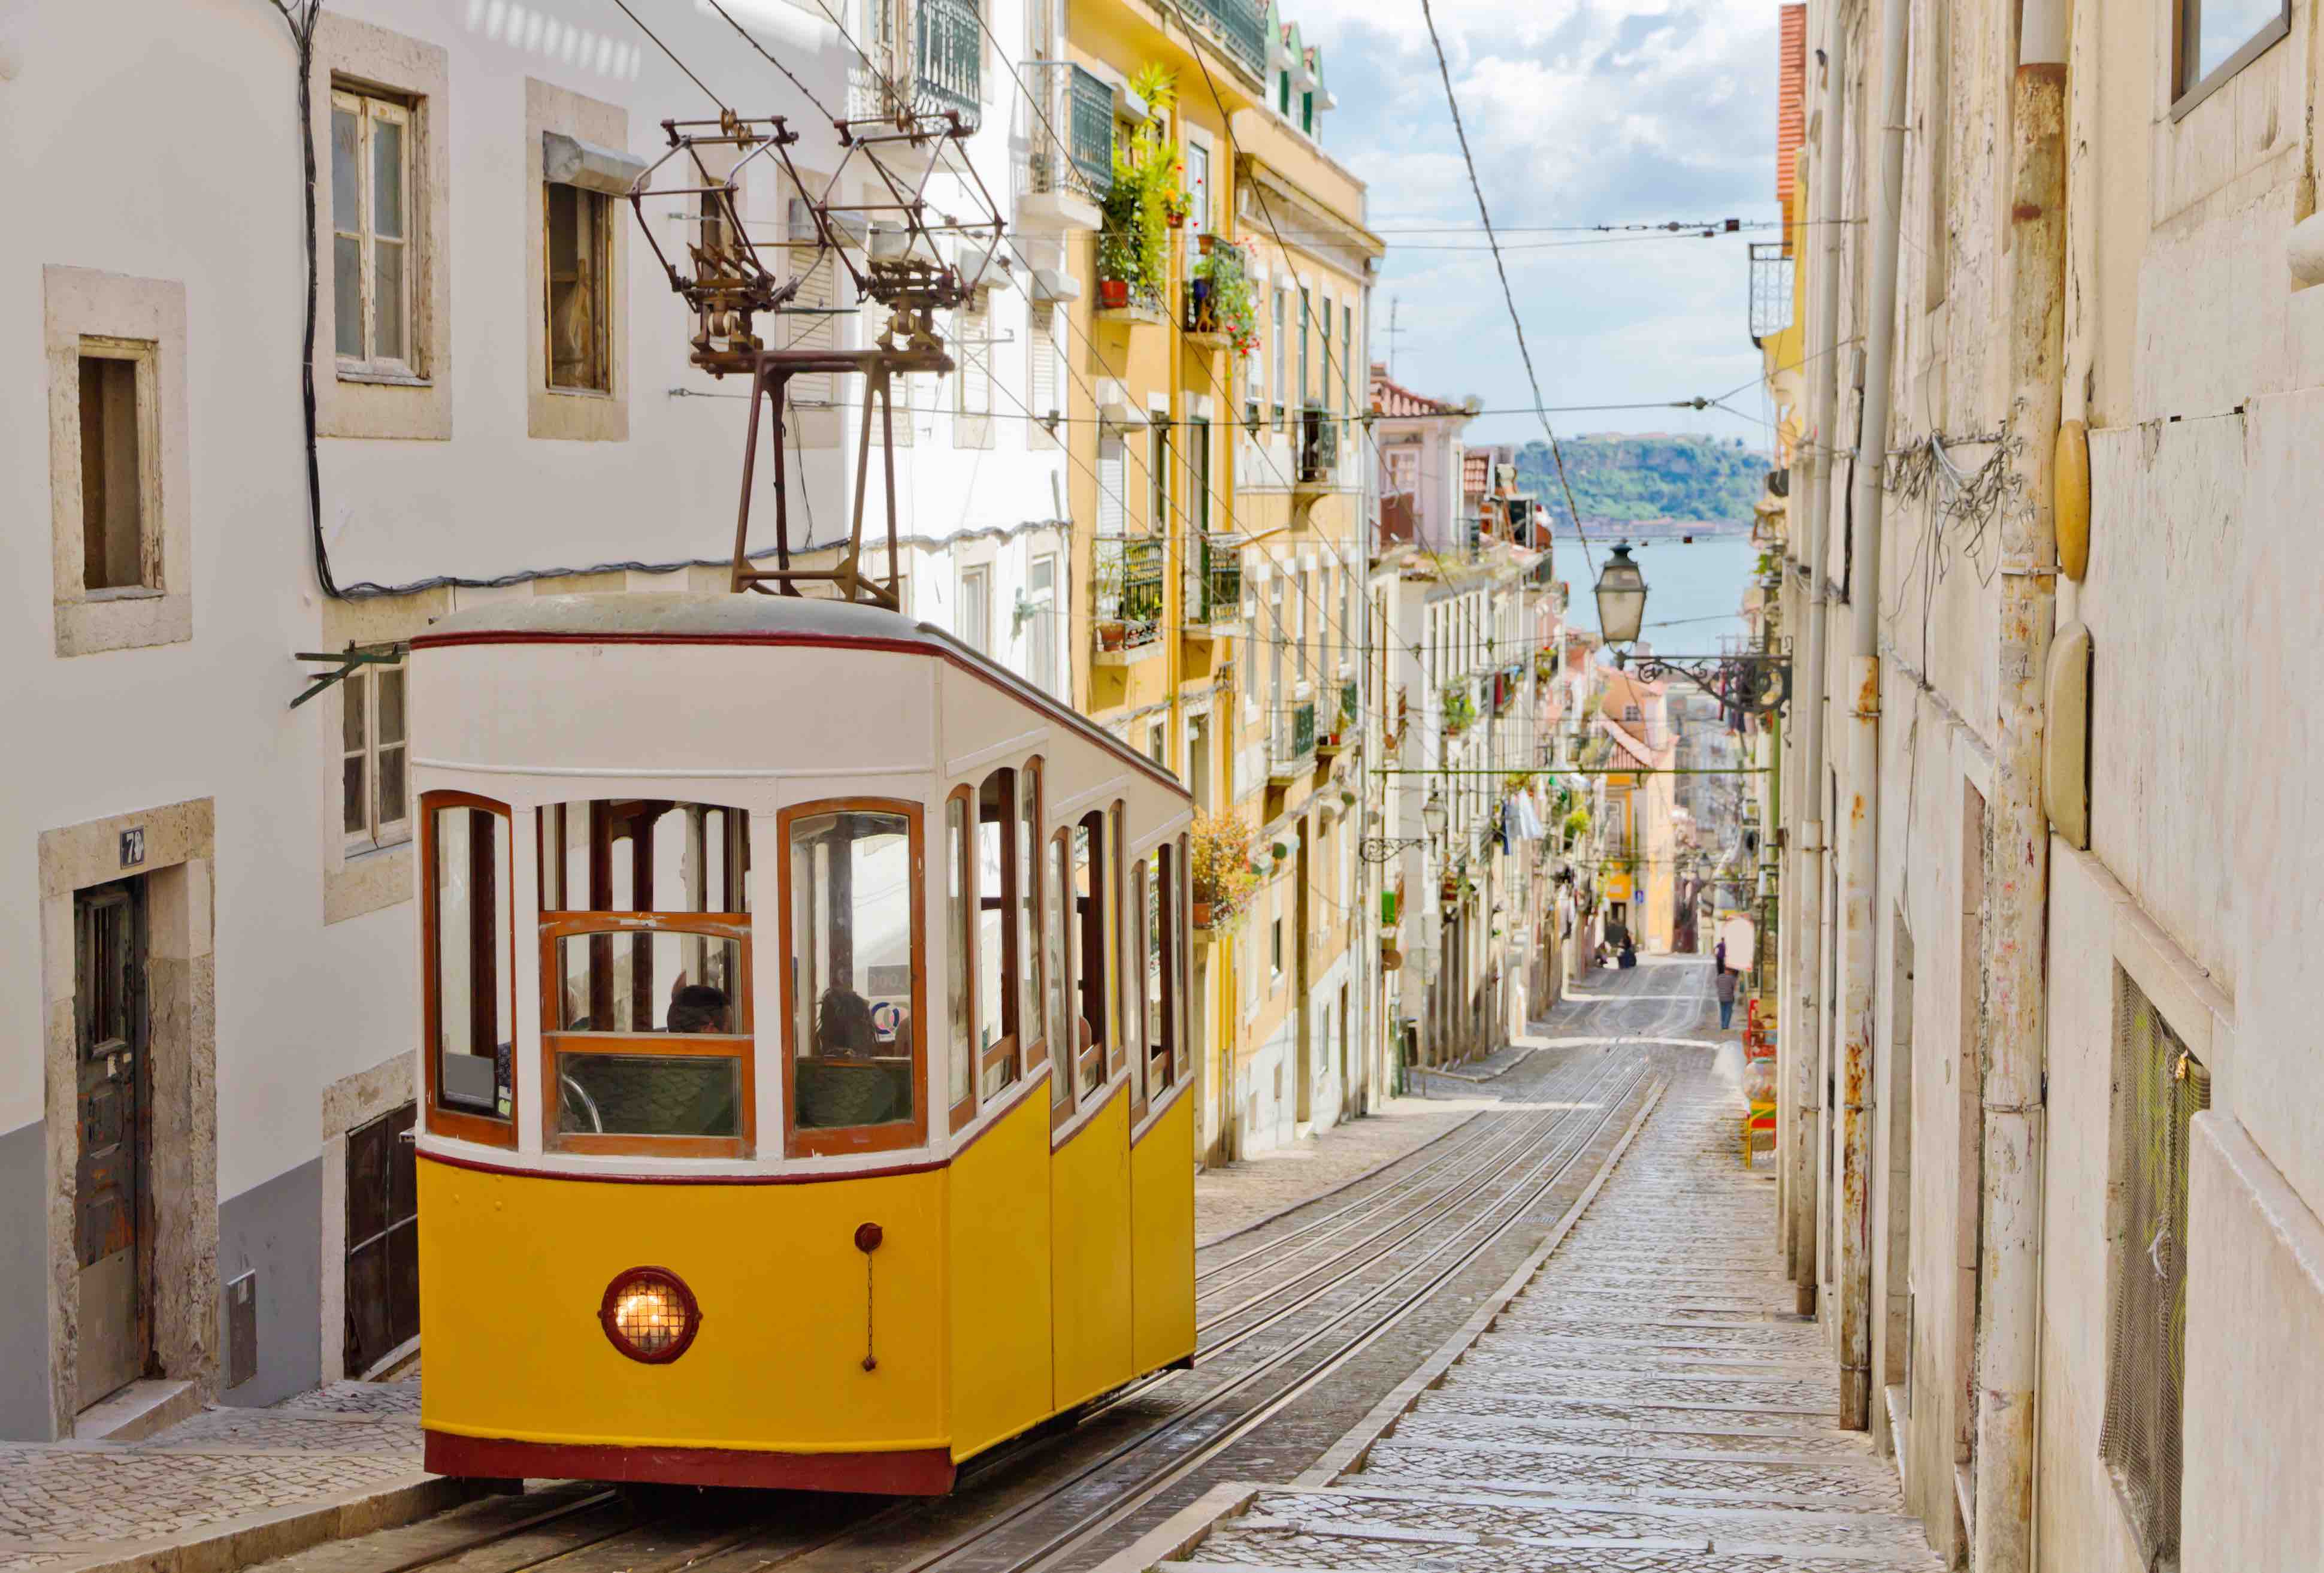 The real estate market of Portugal is gaining momentum